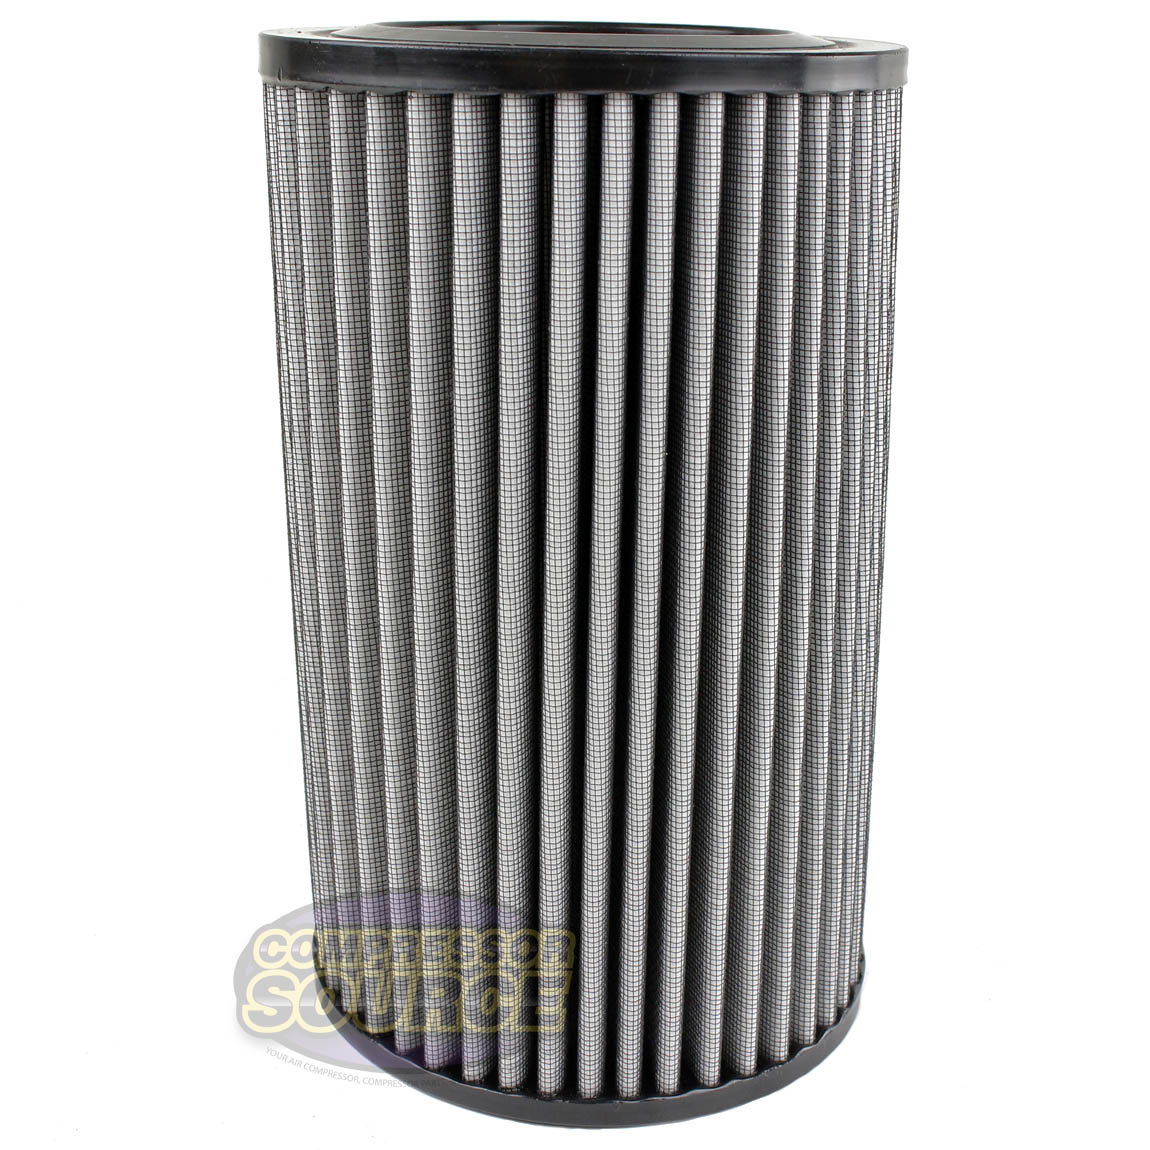 AP435 Champions Replacements Intake Filter Polyester Element Pre Filter P08208A